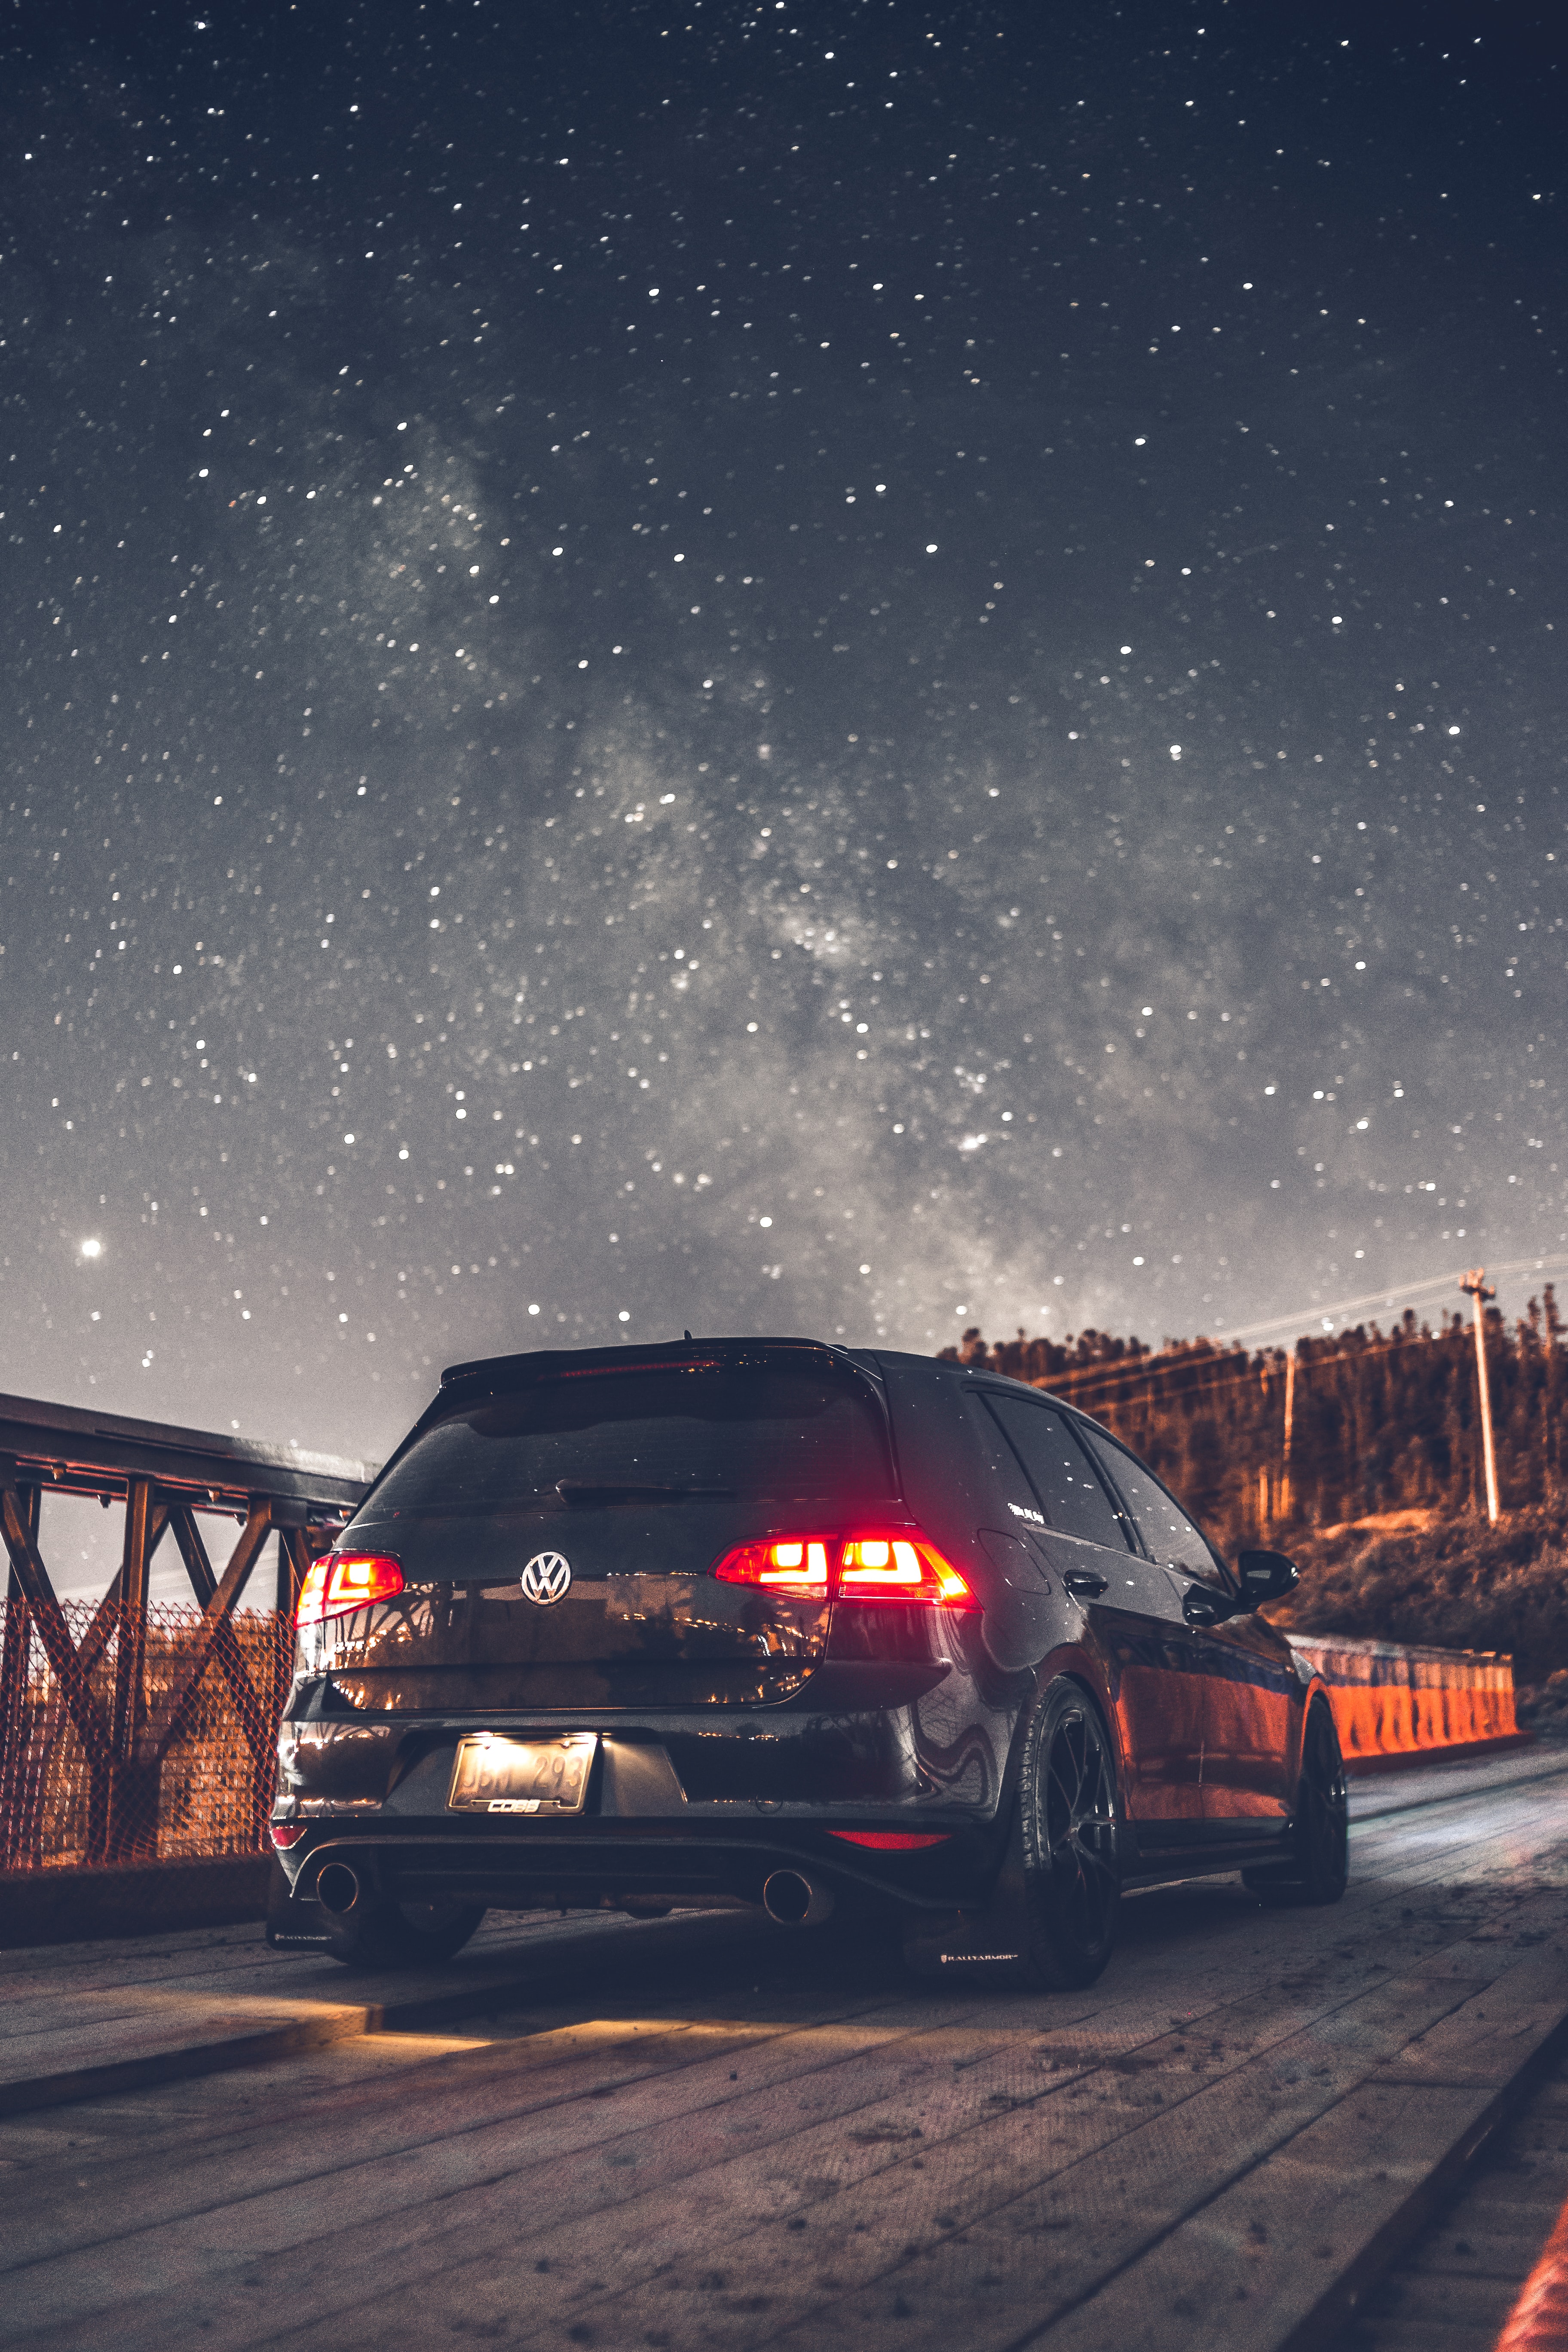 volkswagen, headlights, back view, lights, cars, car, starry sky, rear view